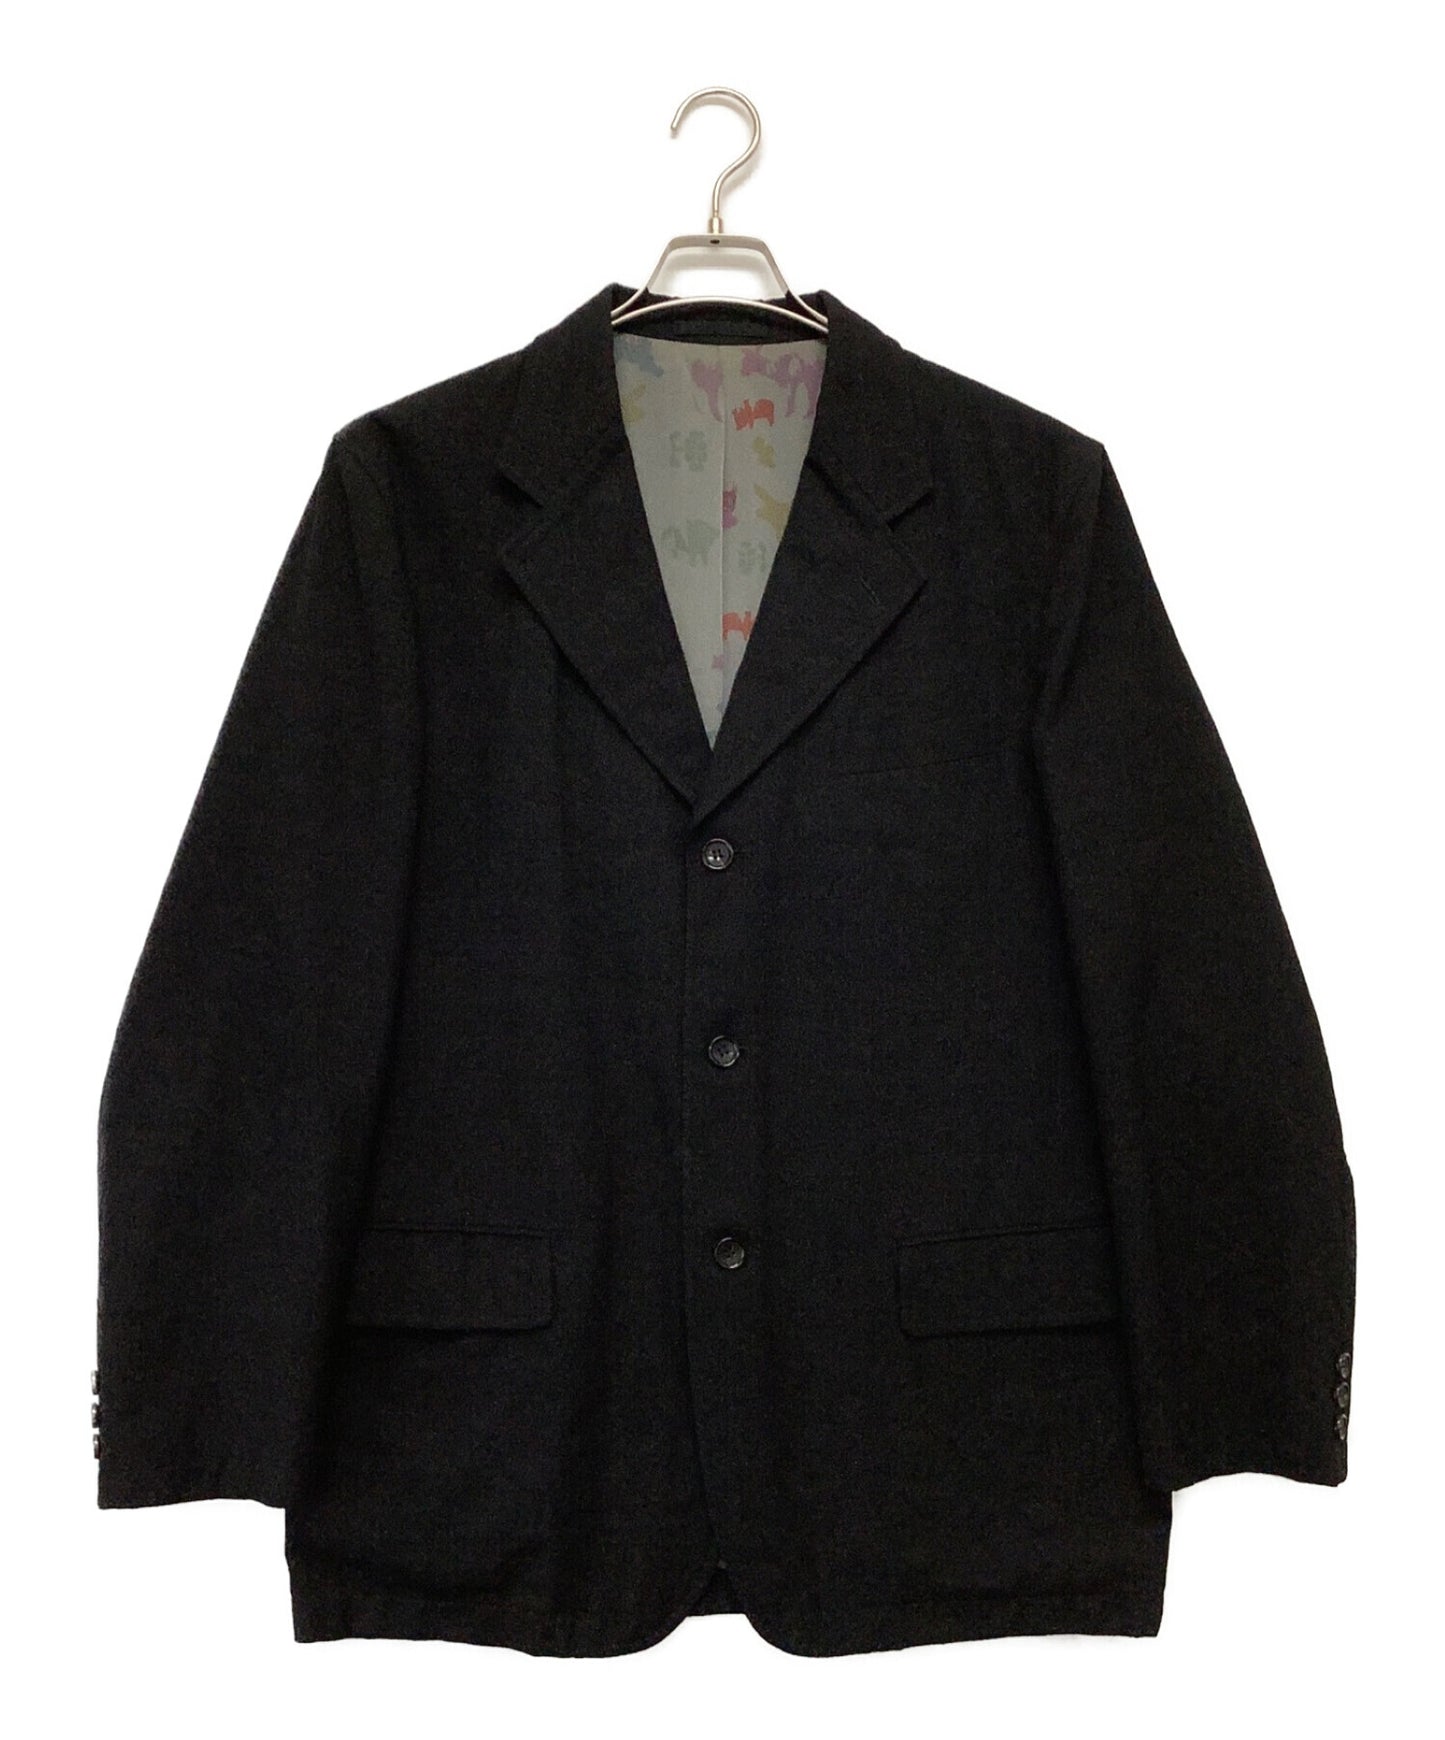 Comme des Garcons Homme Tailored Jacket with Bambi 패턴 라이닝 hk-j042